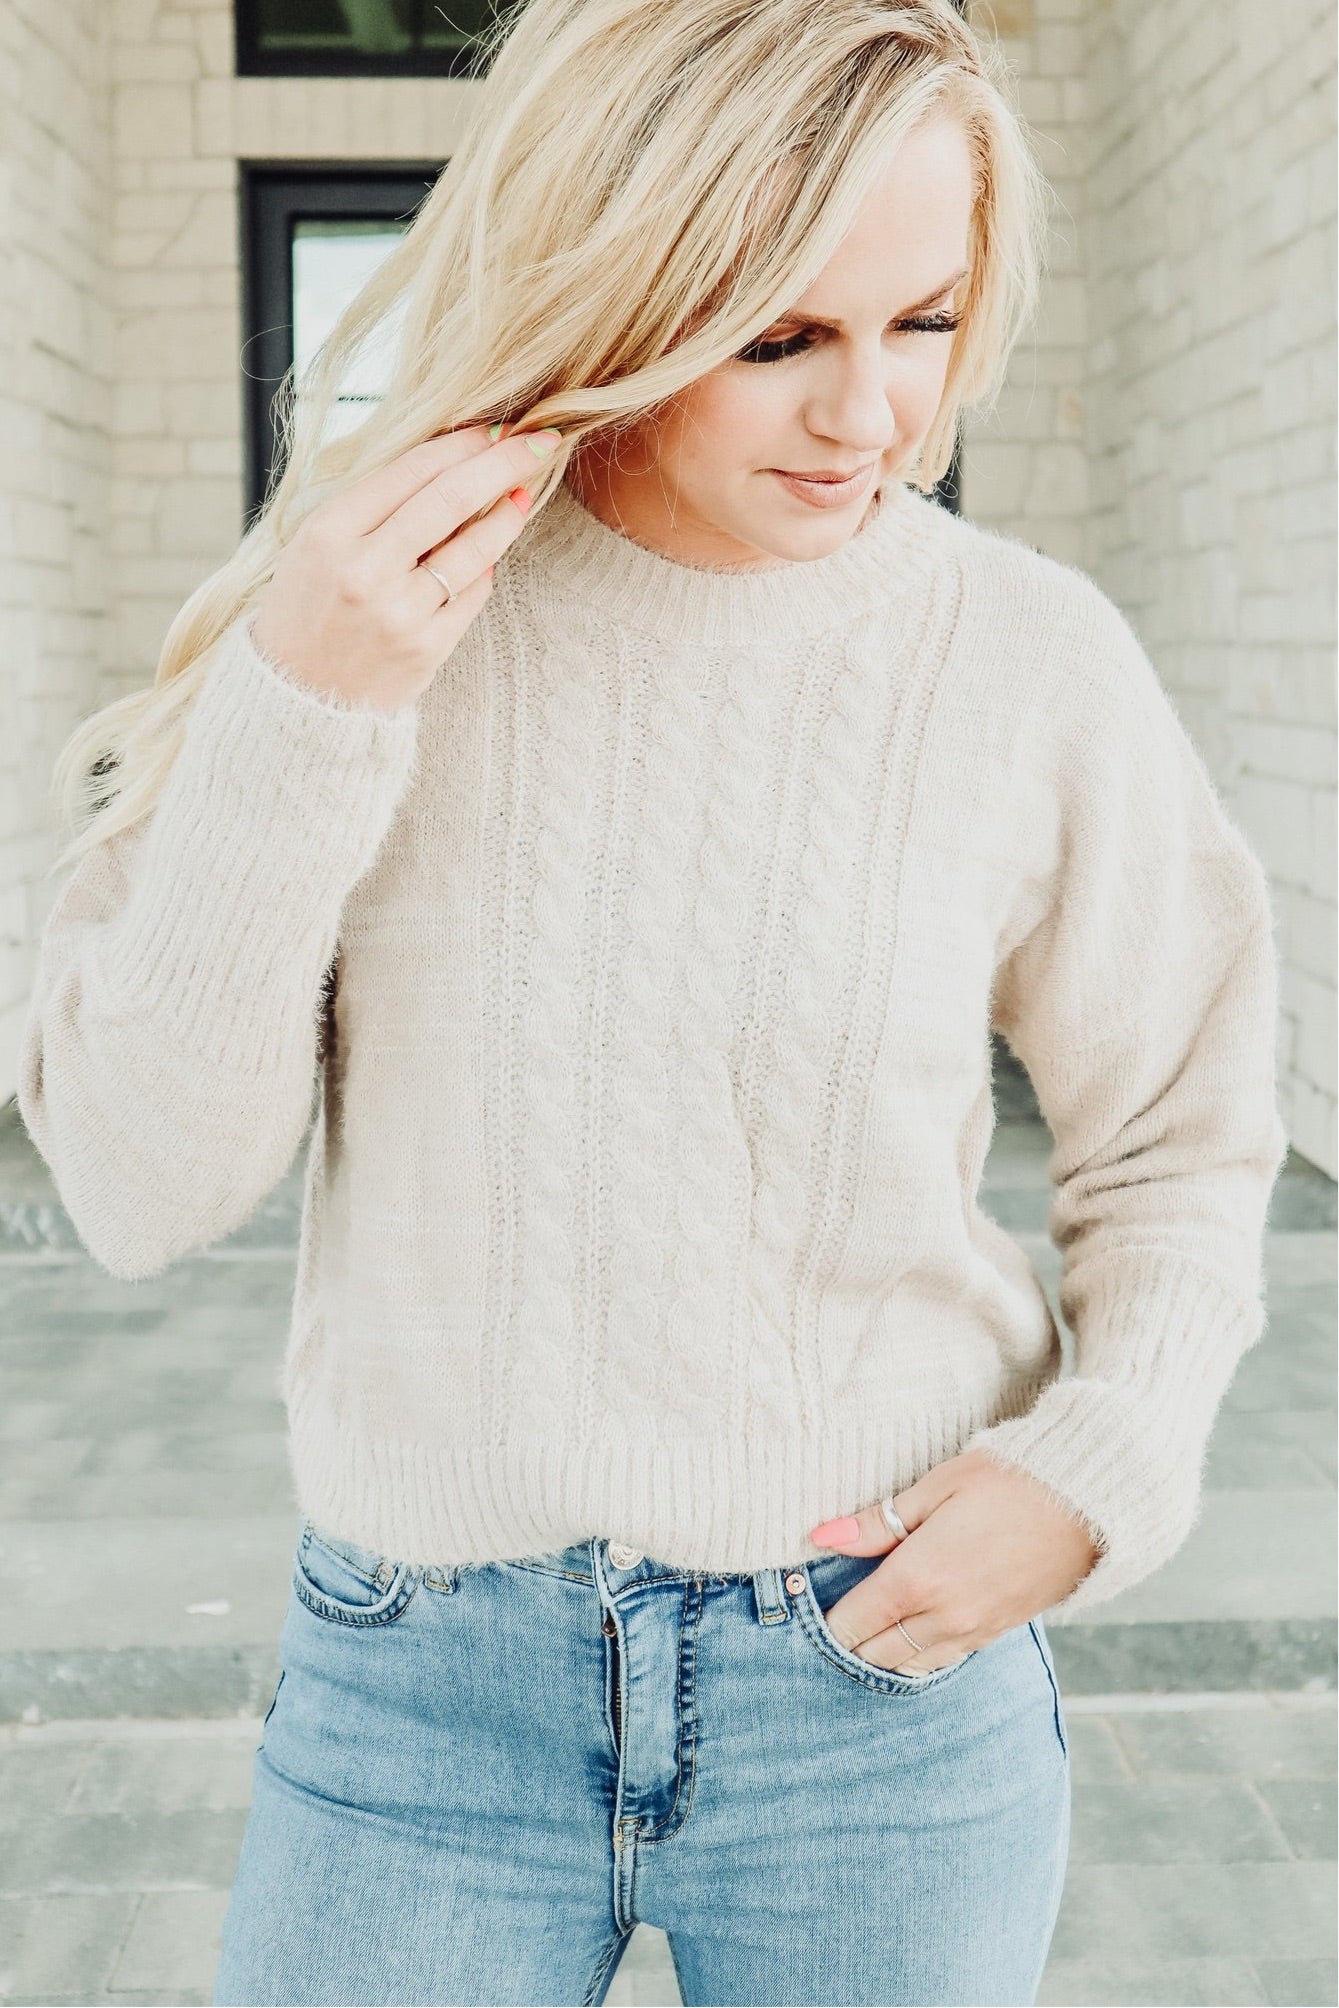 Tan Cable Knit Sweater